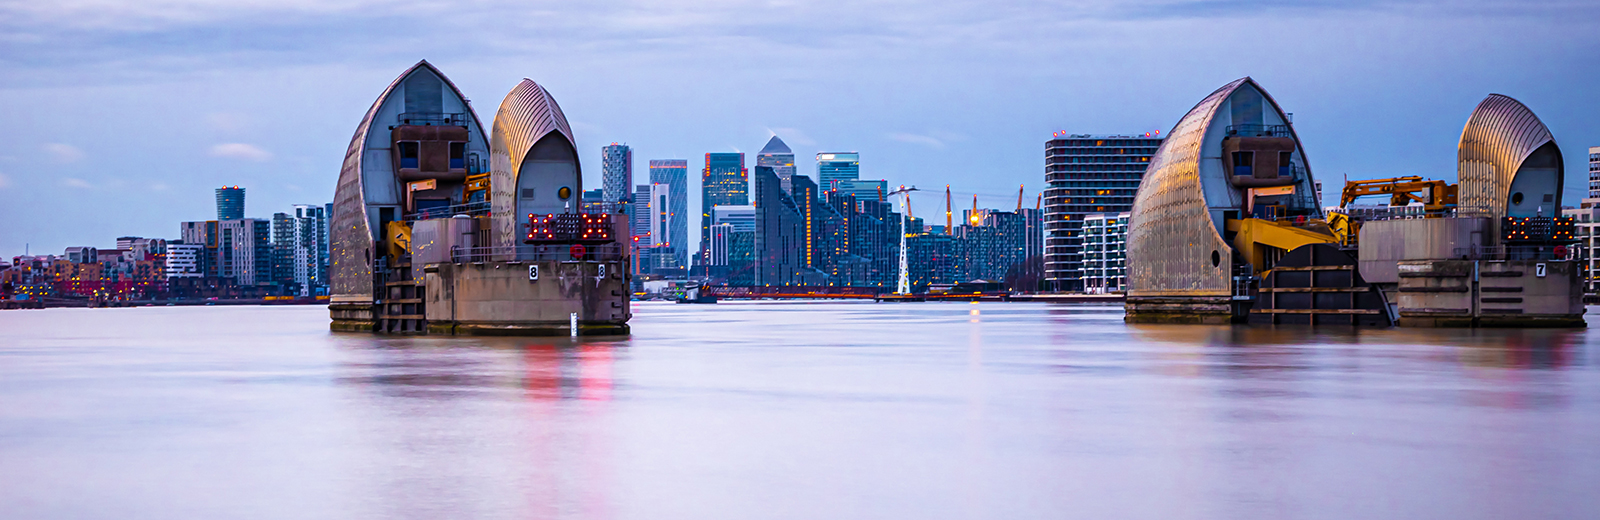 View of Canary Wharf through the Thames Barrier